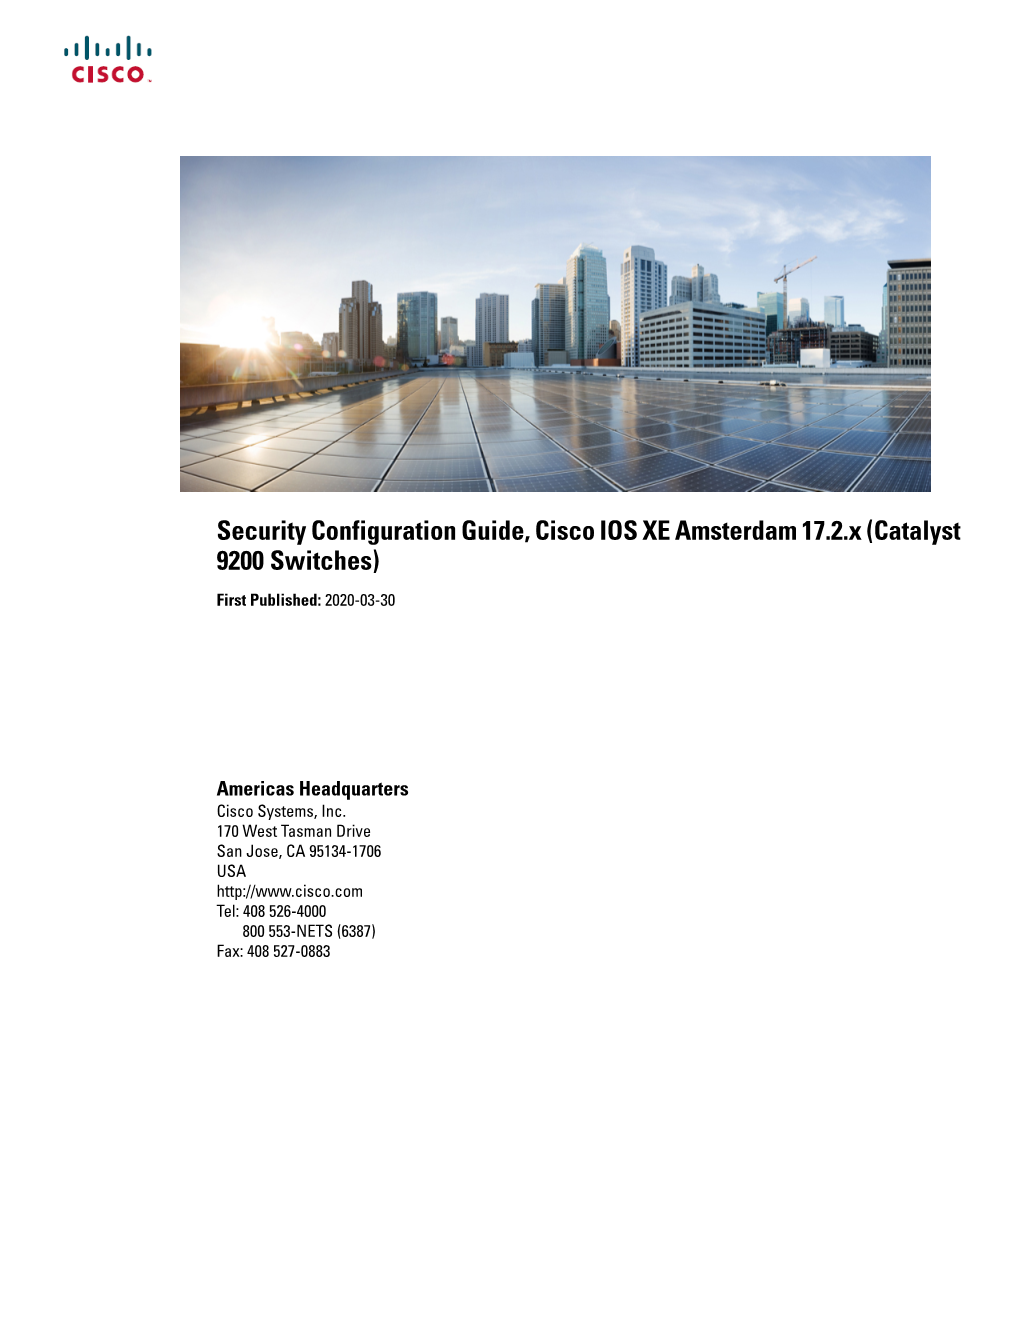 Security Configuration Guide, Cisco IOS XE Amsterdam 17.2.X (Catalyst 9200 Switches)